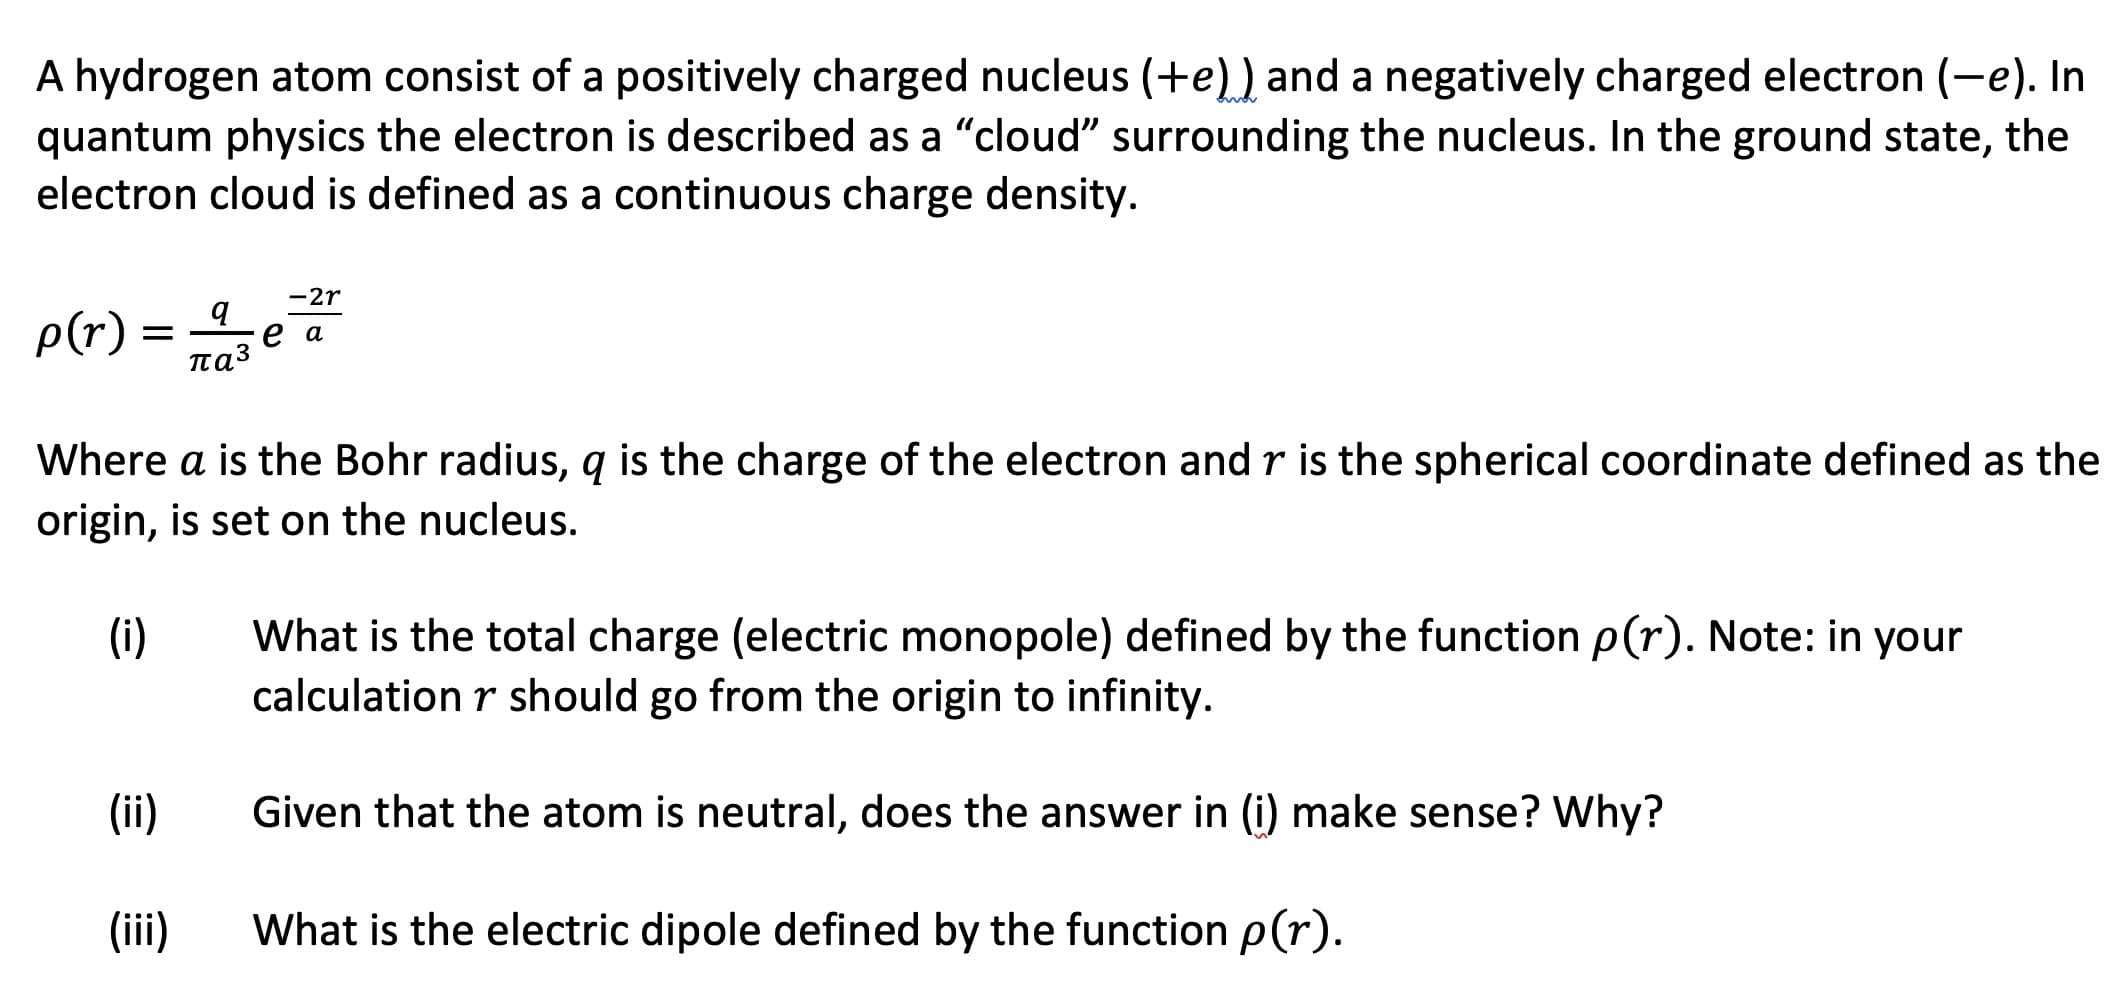 A hydrogen atom consist of a positively charged nucleus (+e)) and a negatively charged electron (-e). In
quantum physics the electron is described as a "cloud" surrounding the nucleus. In the ground state, the
electron cloud is defined as a continuous charge density.
-2r
p(r)
паз
Where a is the Bohr radius, q is the charge of the electron and r is the sph
origin, is set on the nucleus.
erical coordinate defined as the
What is the total charge (electric monopole) defined by the function p(r). Note: in your
calculation r should go from the origin to infinity.
(i)
(ii)
Given that the atom is neutral, does the answer in (i) make sense? Why?
(iii)
What is the electric dipole defined by the function p(r).
